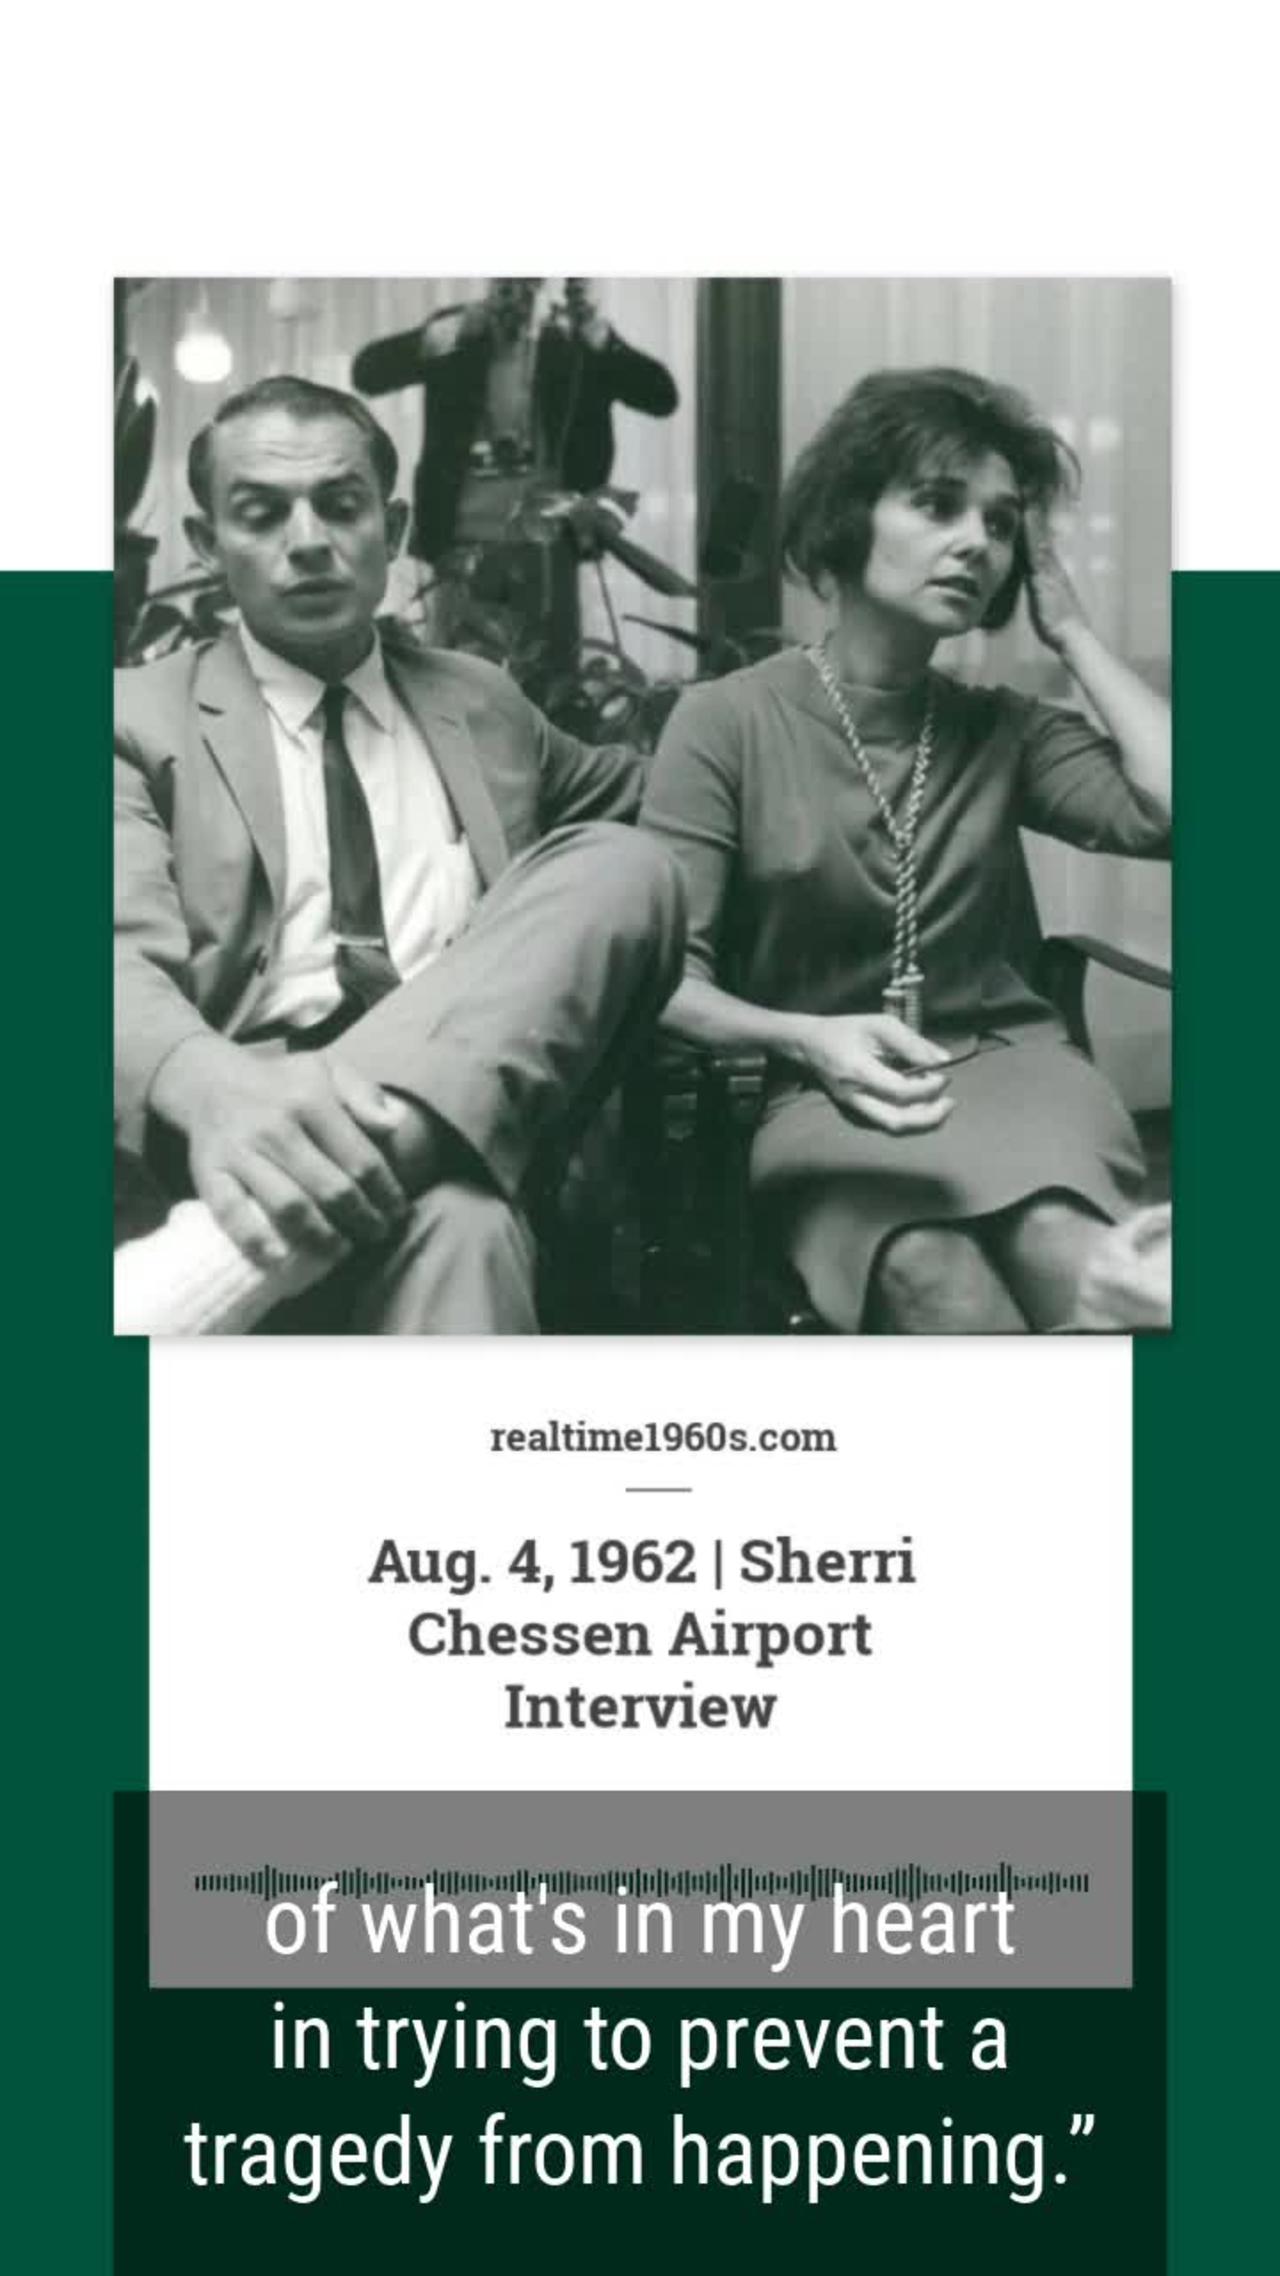 Aug. 4, 1962 - Sherri Chessen News Conference at L.A. International Airport